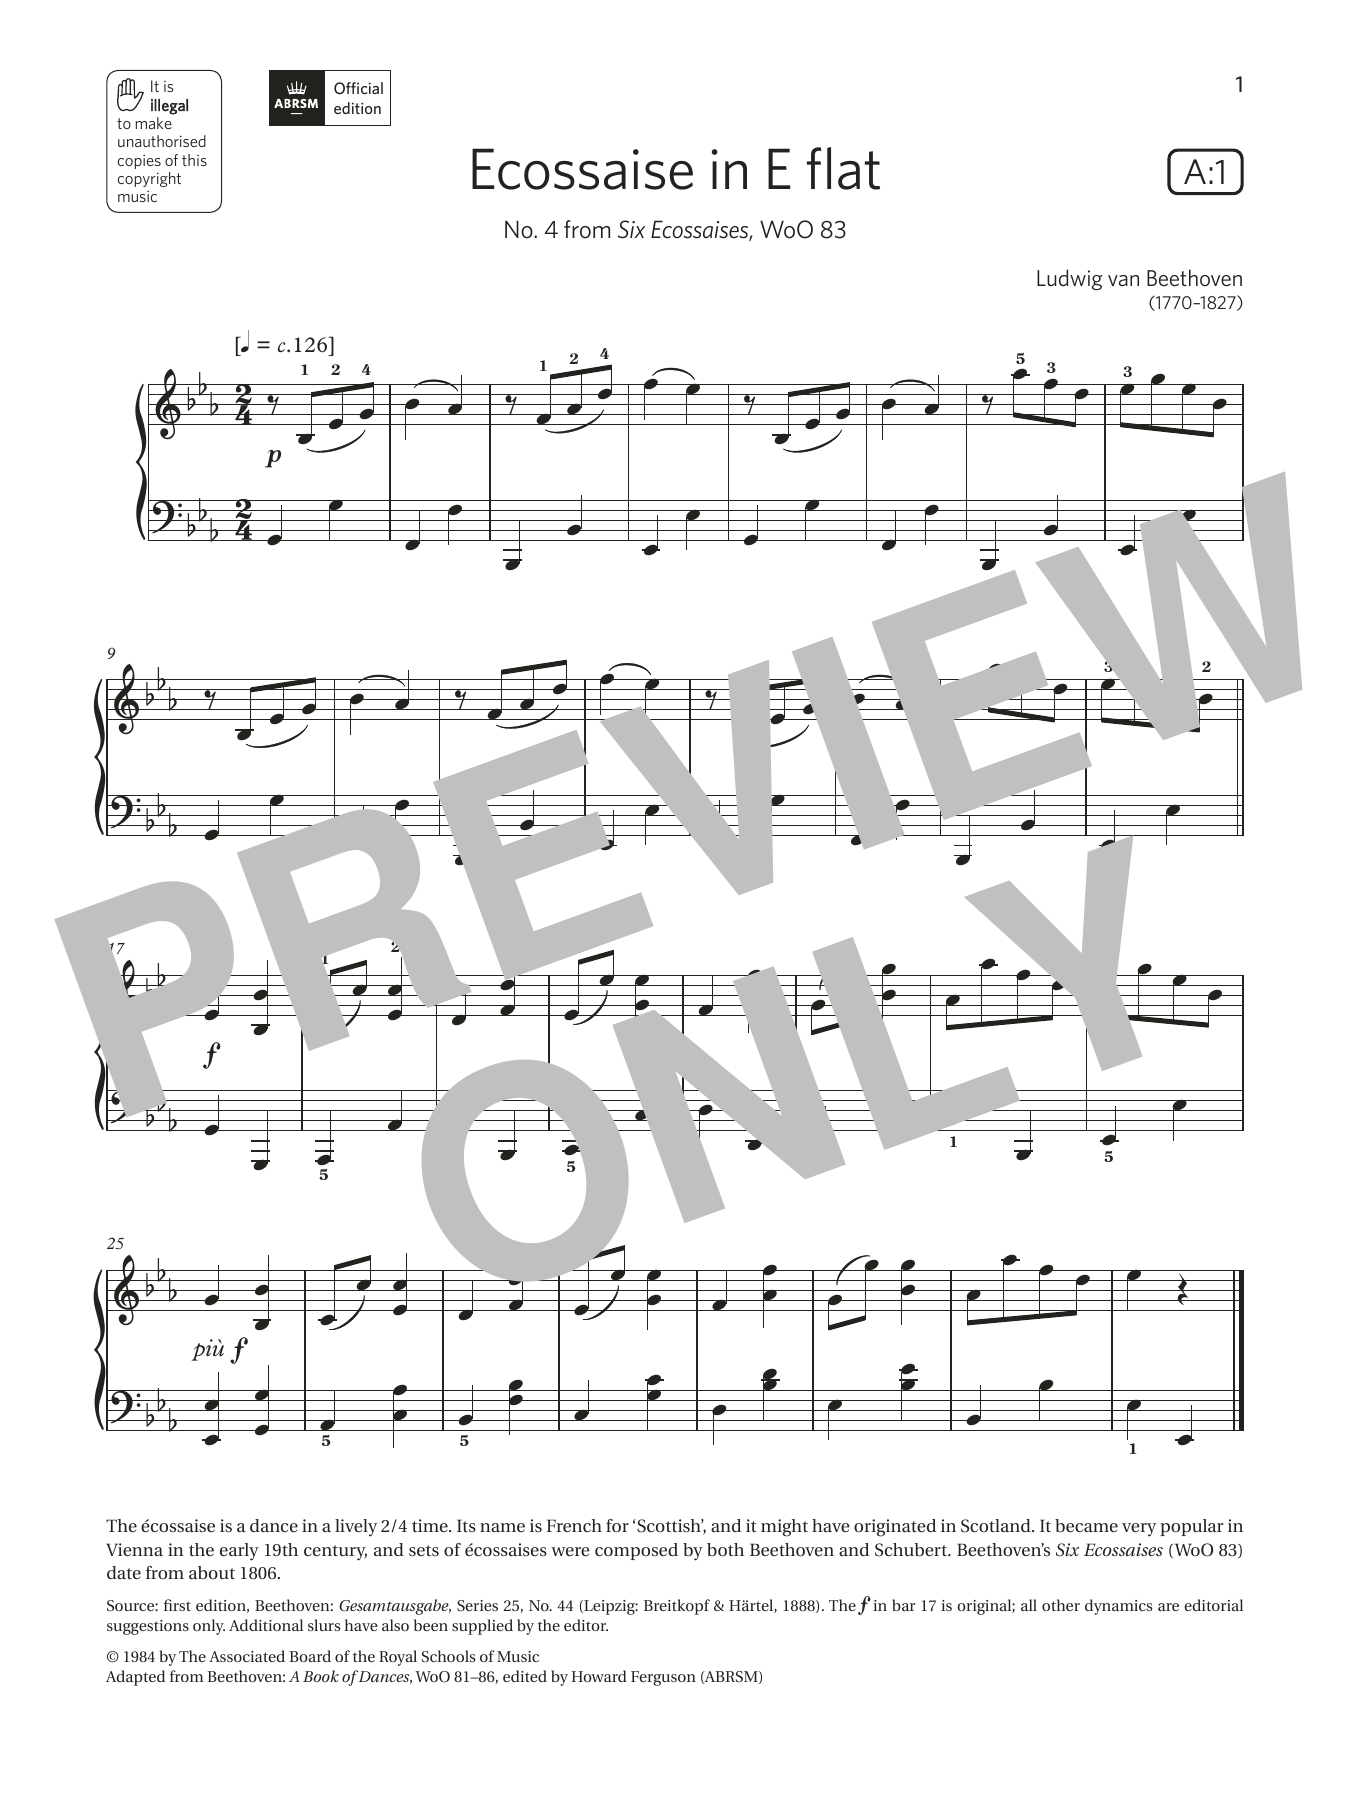 Download Ludwig van Beethoven Ecossaise in E flat (Grade 3, list A1, Sheet Music